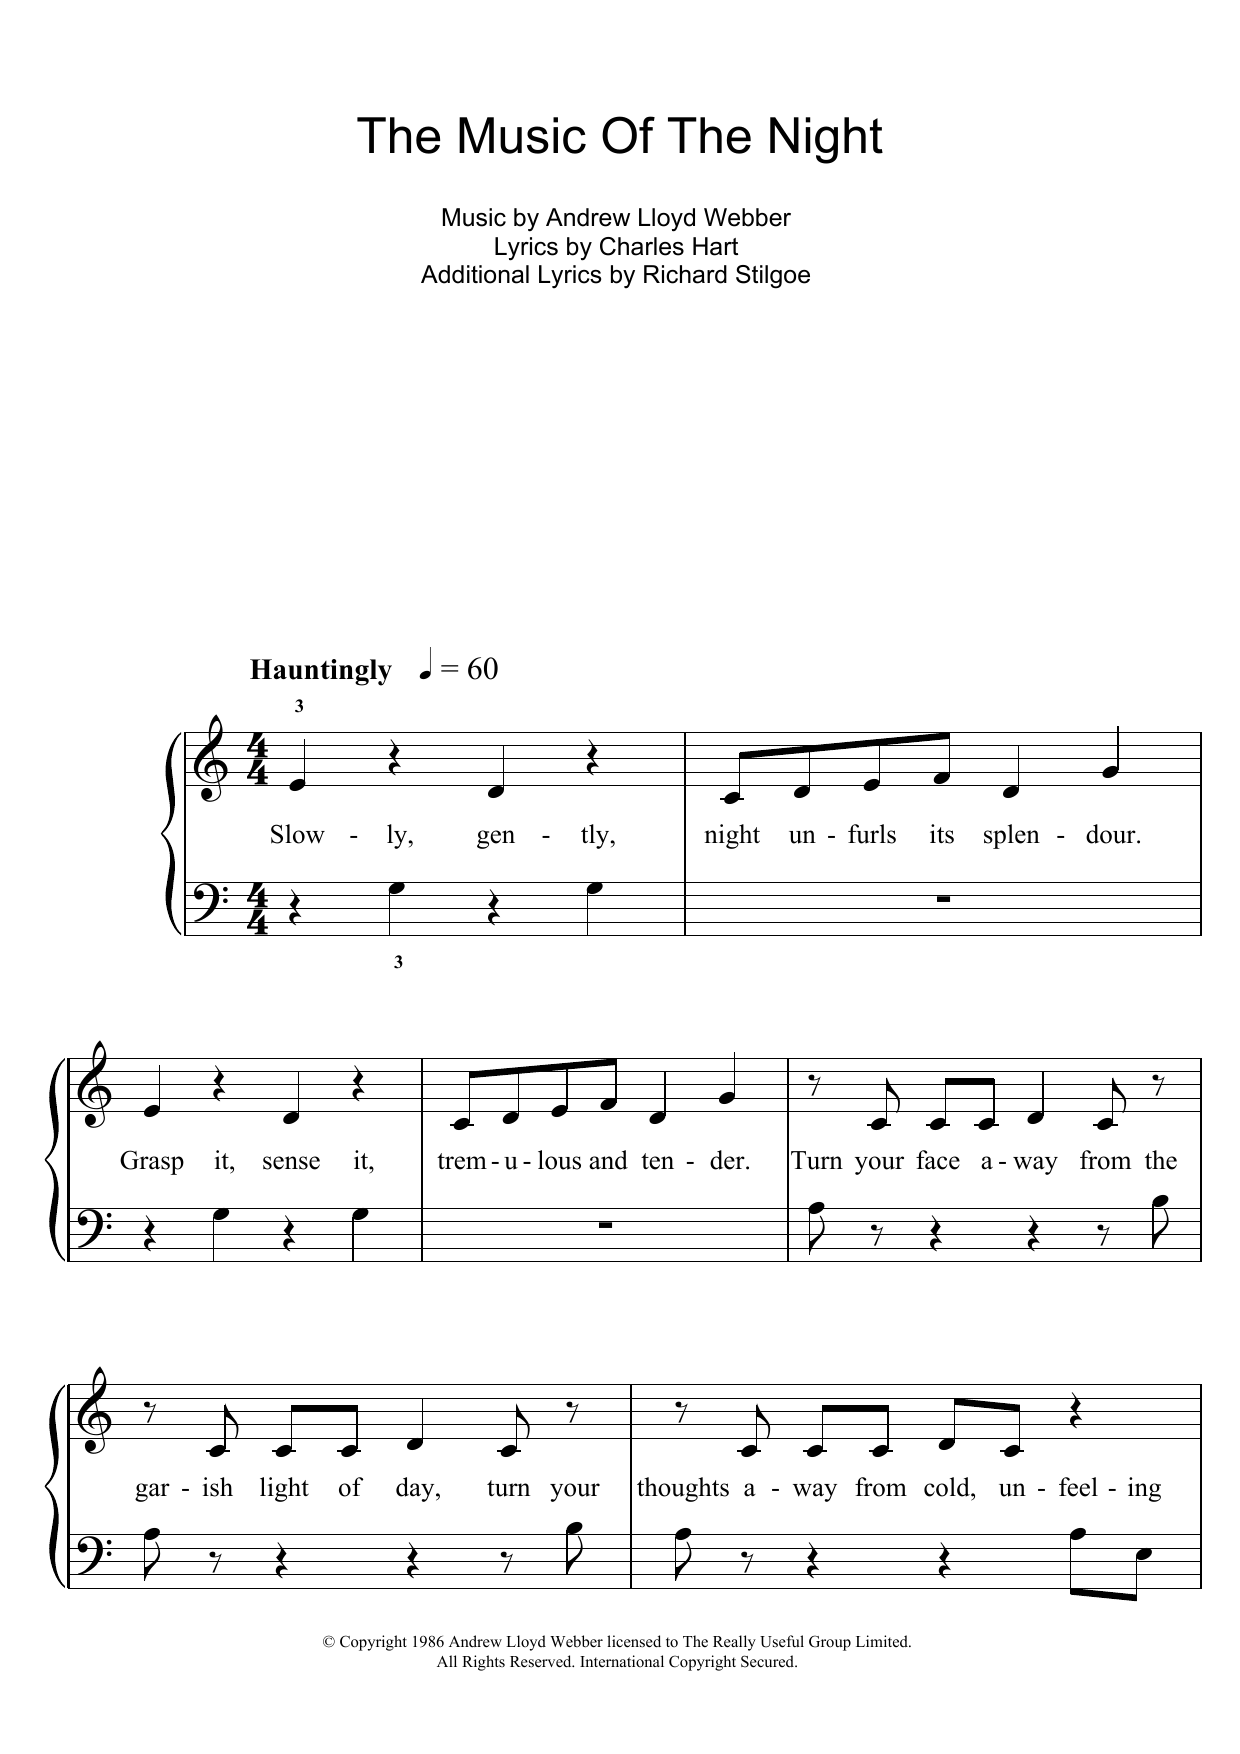 Download Andrew Lloyd Webber The Music Of The Night (from The Phanto Sheet Music